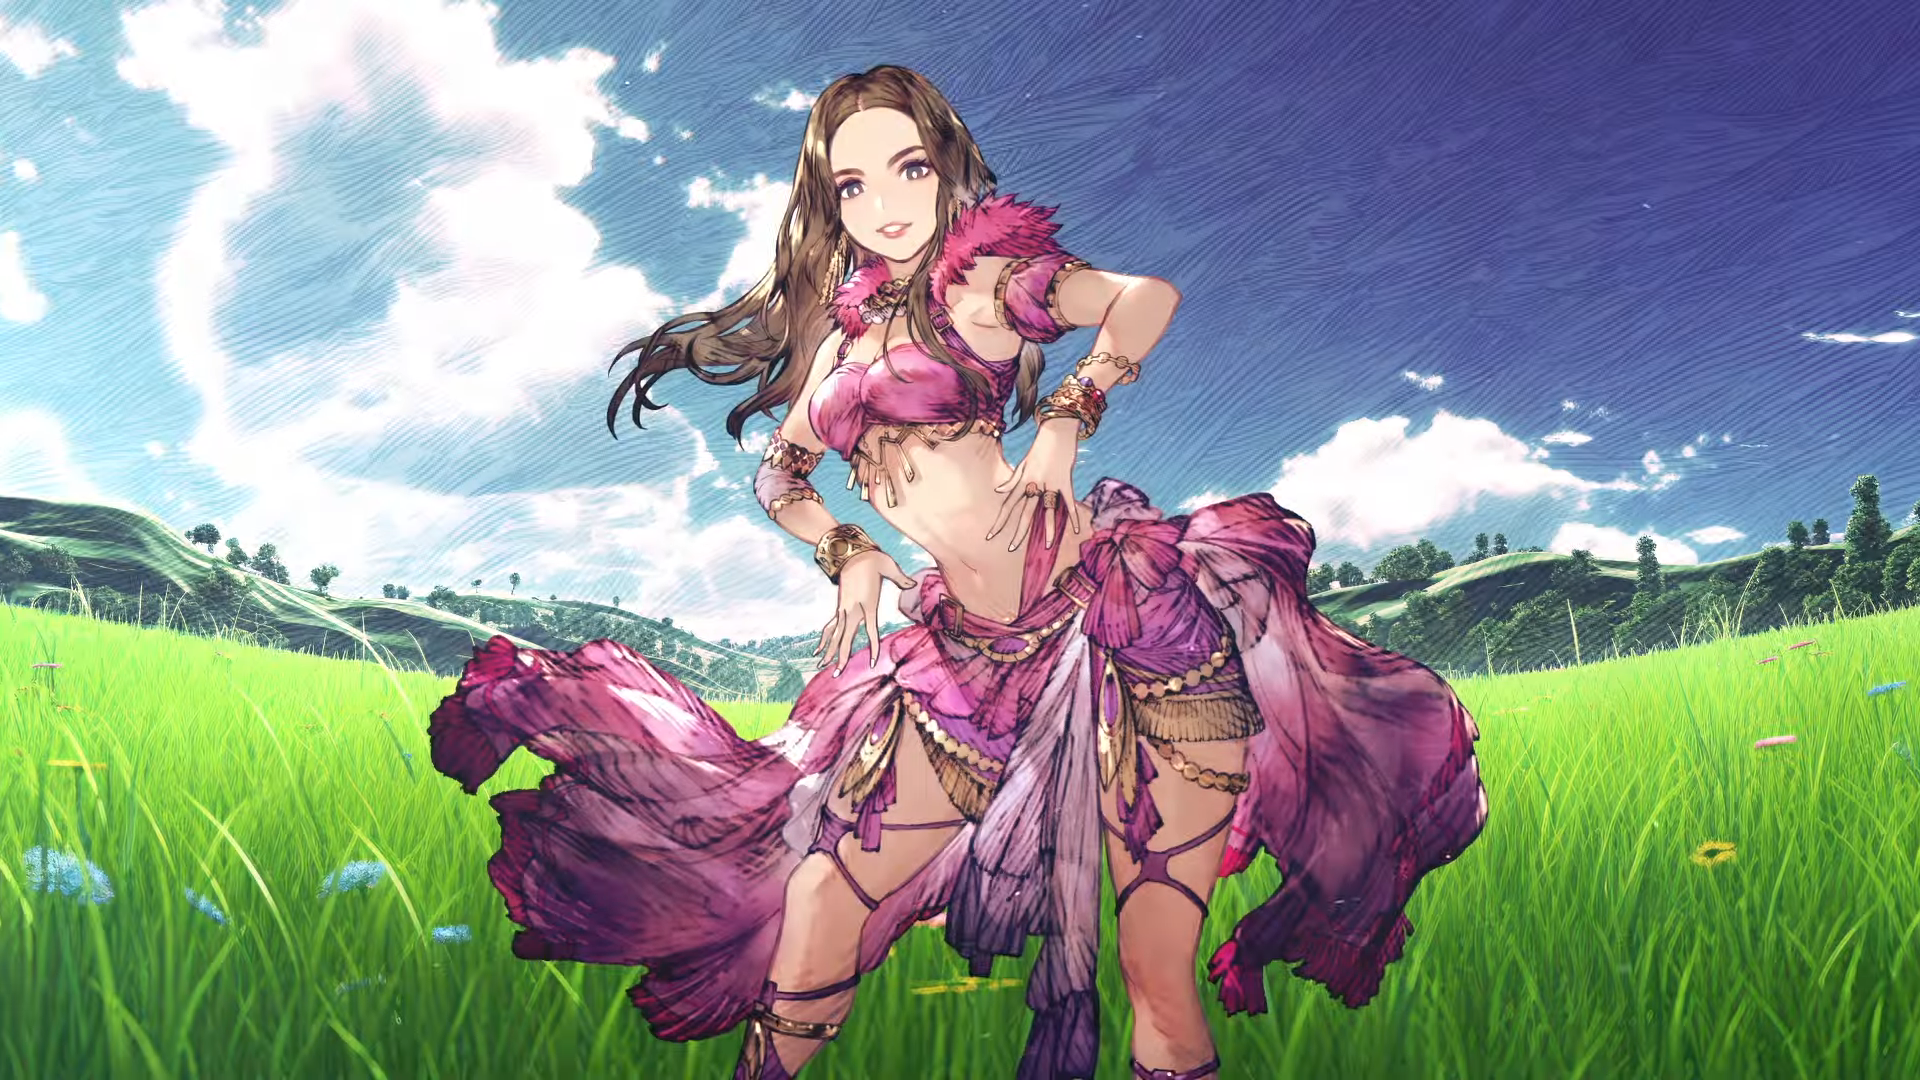 Square Enix Has Made TikTok Star Addison Rae Playable in Final Fantasy Brave Exvius & War of the Visions